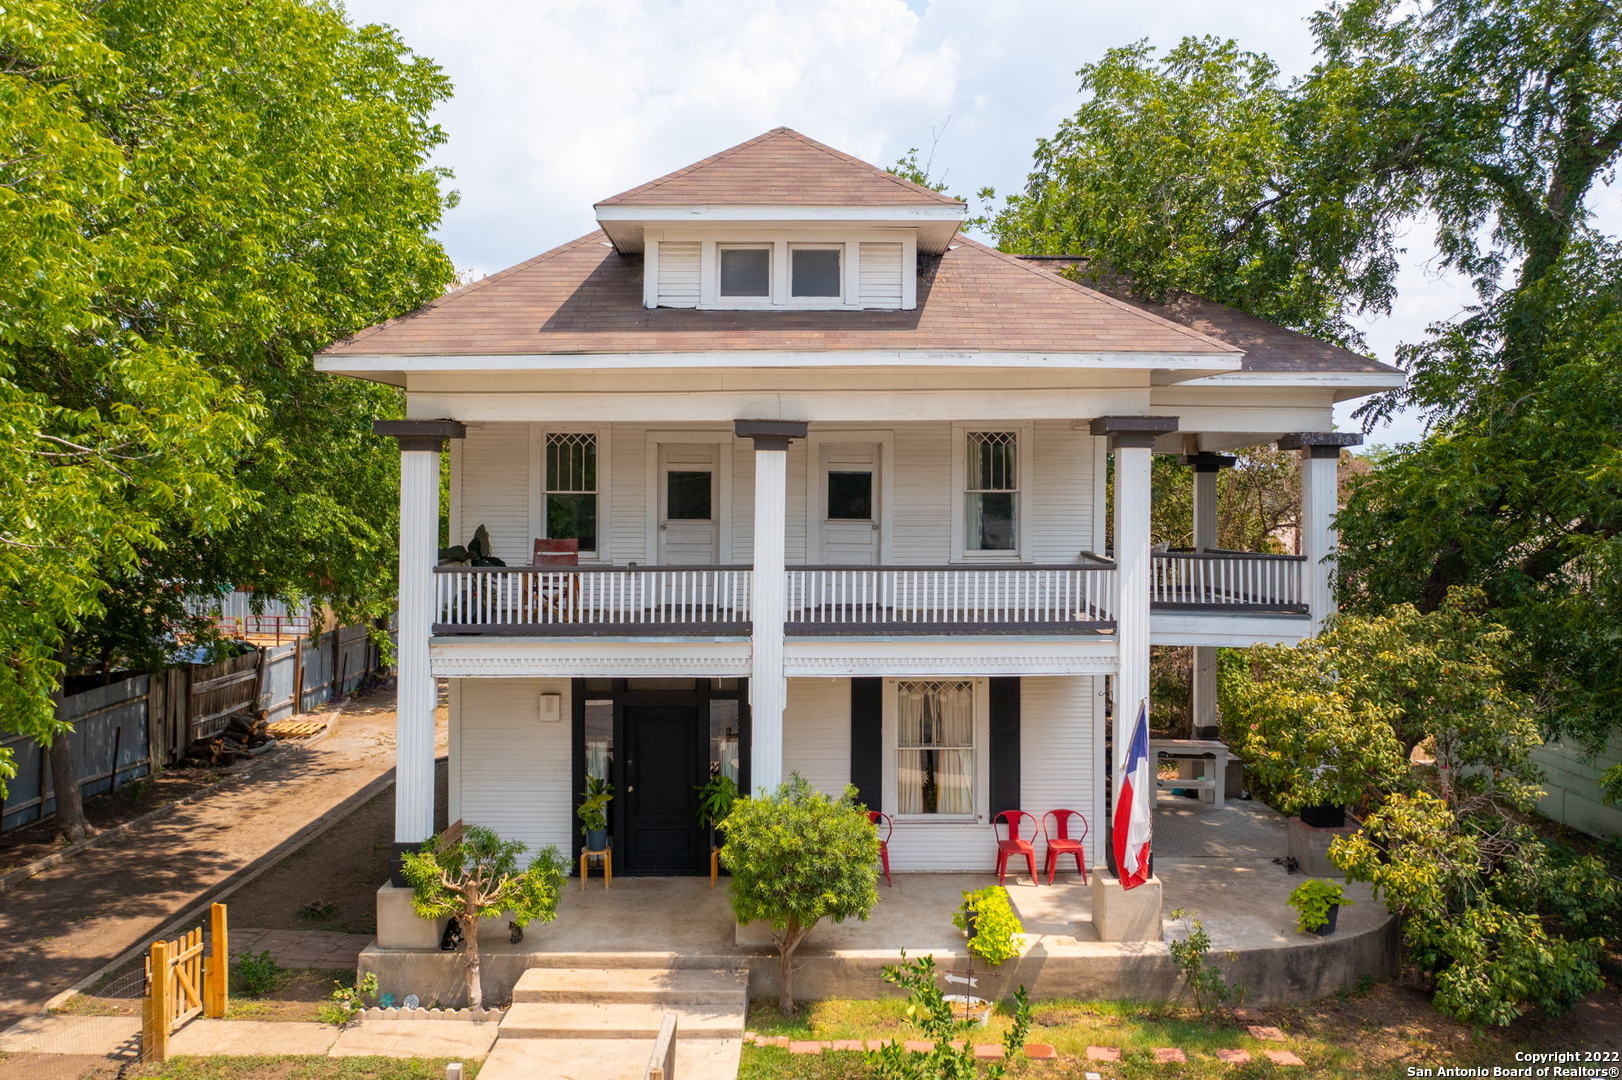 This 1920 Historical beauty, flaunts its irresistible curb appeal, highlighting the concrete covered wrap around porch offering over 300 sq ft to use for entertaining, relaxing, dinning, etc., the opportunities are endless!   This home features a 300 sq ft mother in law suite connected to the main home.  It has 1 bed, 1 bath, kitchen/dining/living space area, personal entry.  The opportunities are endless, the door can be walled off or left as is for Income producing, apt, etc  The grand foyer's elegance is displayed by its original front door, chandelier, 10 foot ceilings, 10 inch baseboards, and ravishing Original hardwood flooring.   This Historic beauty provides superior quality, design and charm to exceed all of your wildest dreams.  Just a short drive to local shopping, state-of-the-art restaurants, walking trails and state parks, this home is situated in the heart of San Antonio Minutes to Conception Park, King William, The Pearl, Downtown, Blue Star & so much more.  Unwind after long days in your spacious jack and jill balcony, overlooking the city or walk upstairs to find a sunny loft with access to the second level personal balcony from the master bedroom.   If you are looking for a historical home with class, elegance, character, and lots of indoor and out door living space look no further, this is the one for you!